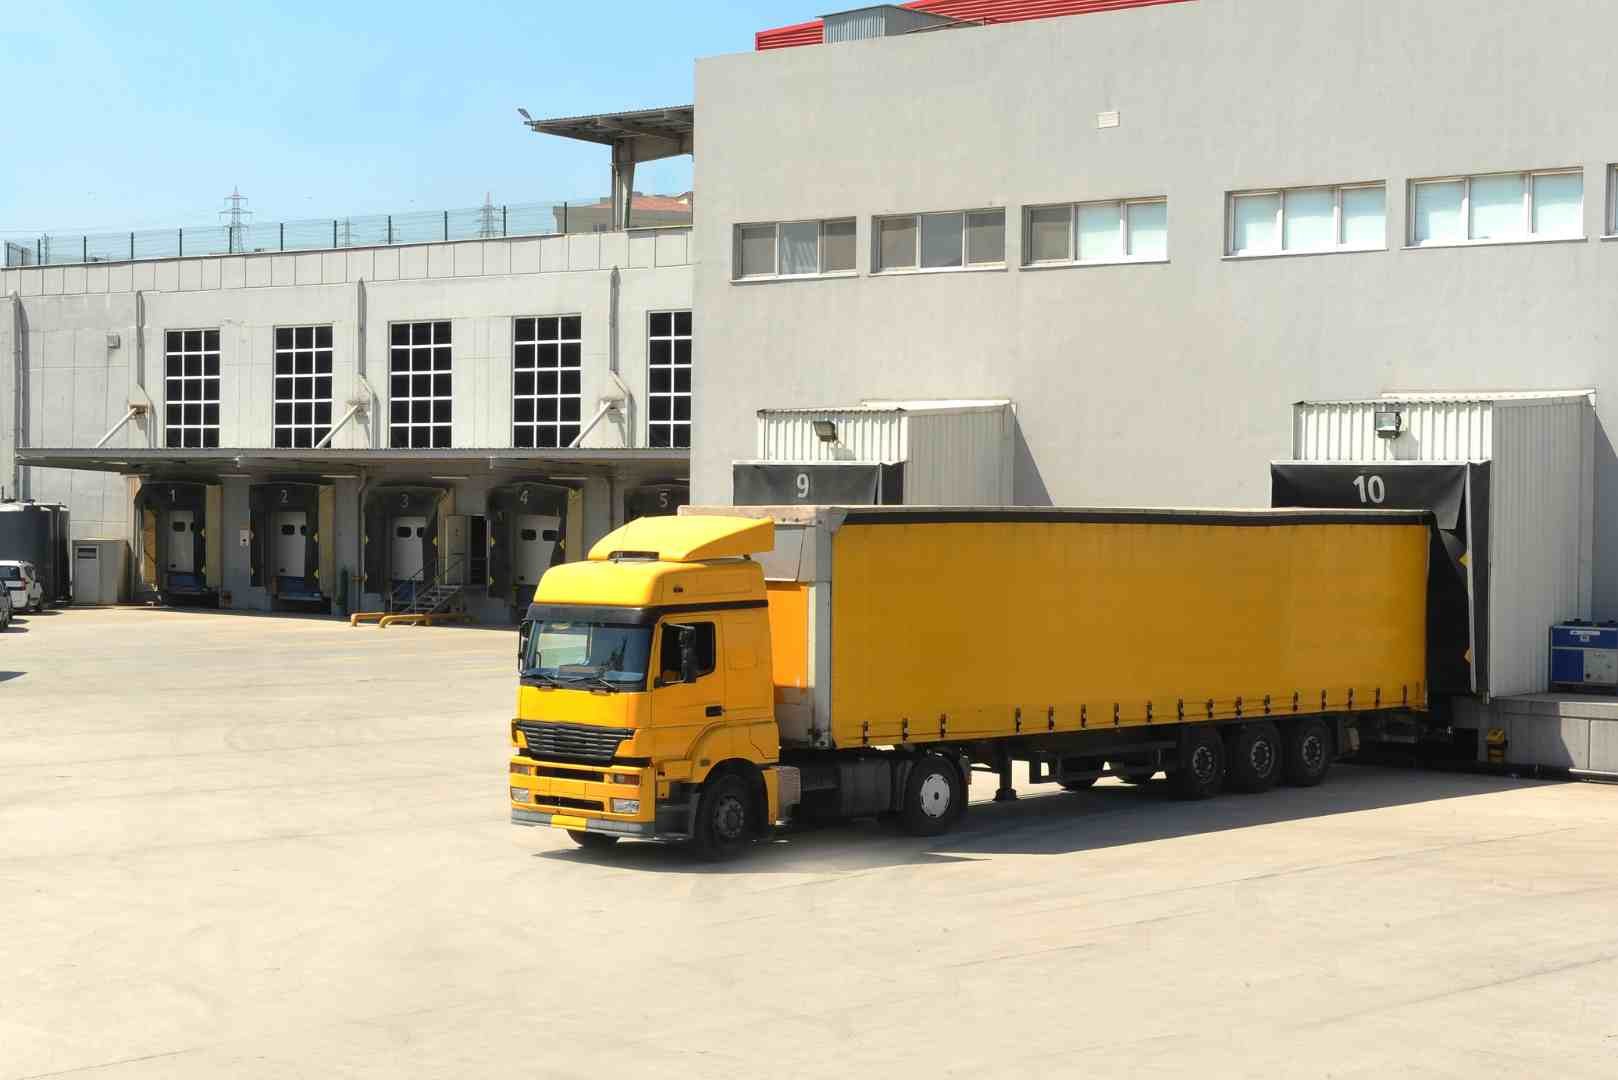 cargo truck at warehouse building